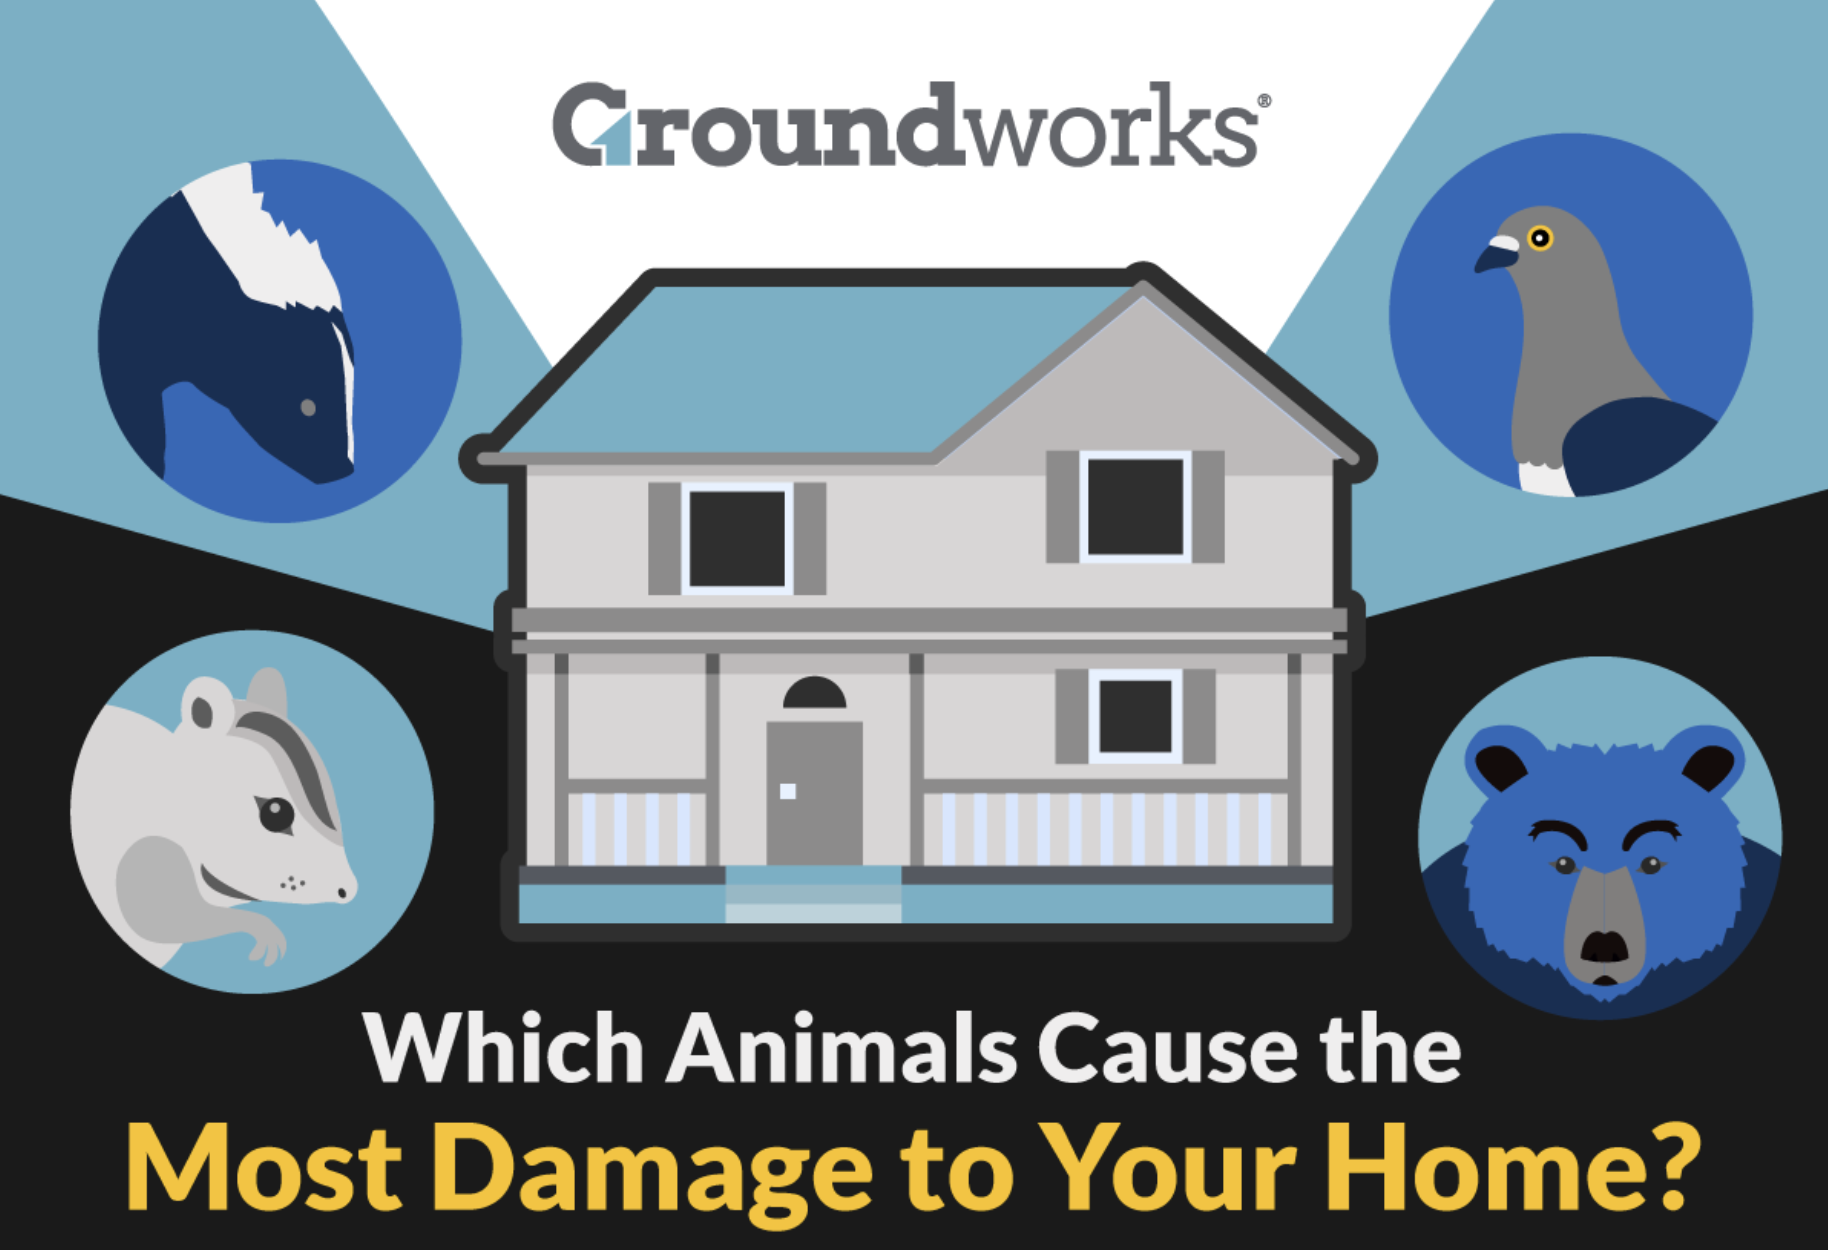 Groundworks which animals and pests cause the most damage to your home infographic